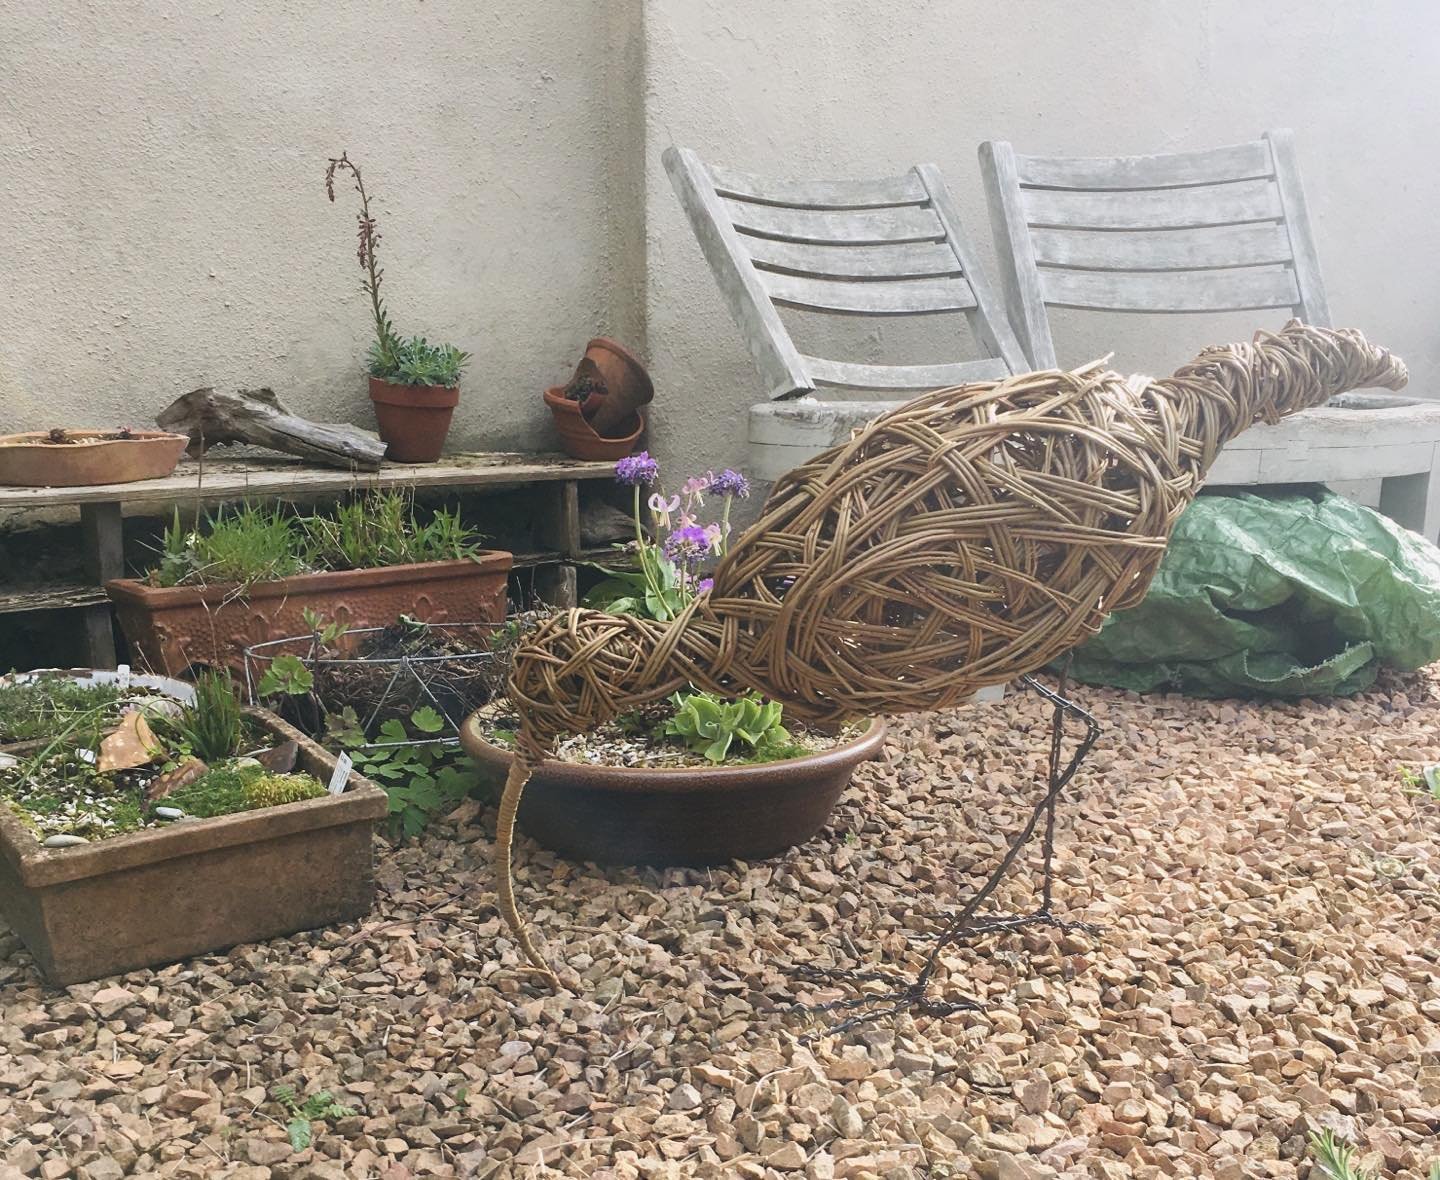 A wonderful workshop with Anna Turnbull @biteabout_arts My curlew seems very happy in the garden . #willowsculpture #willow @scottishbasketmakerscircle